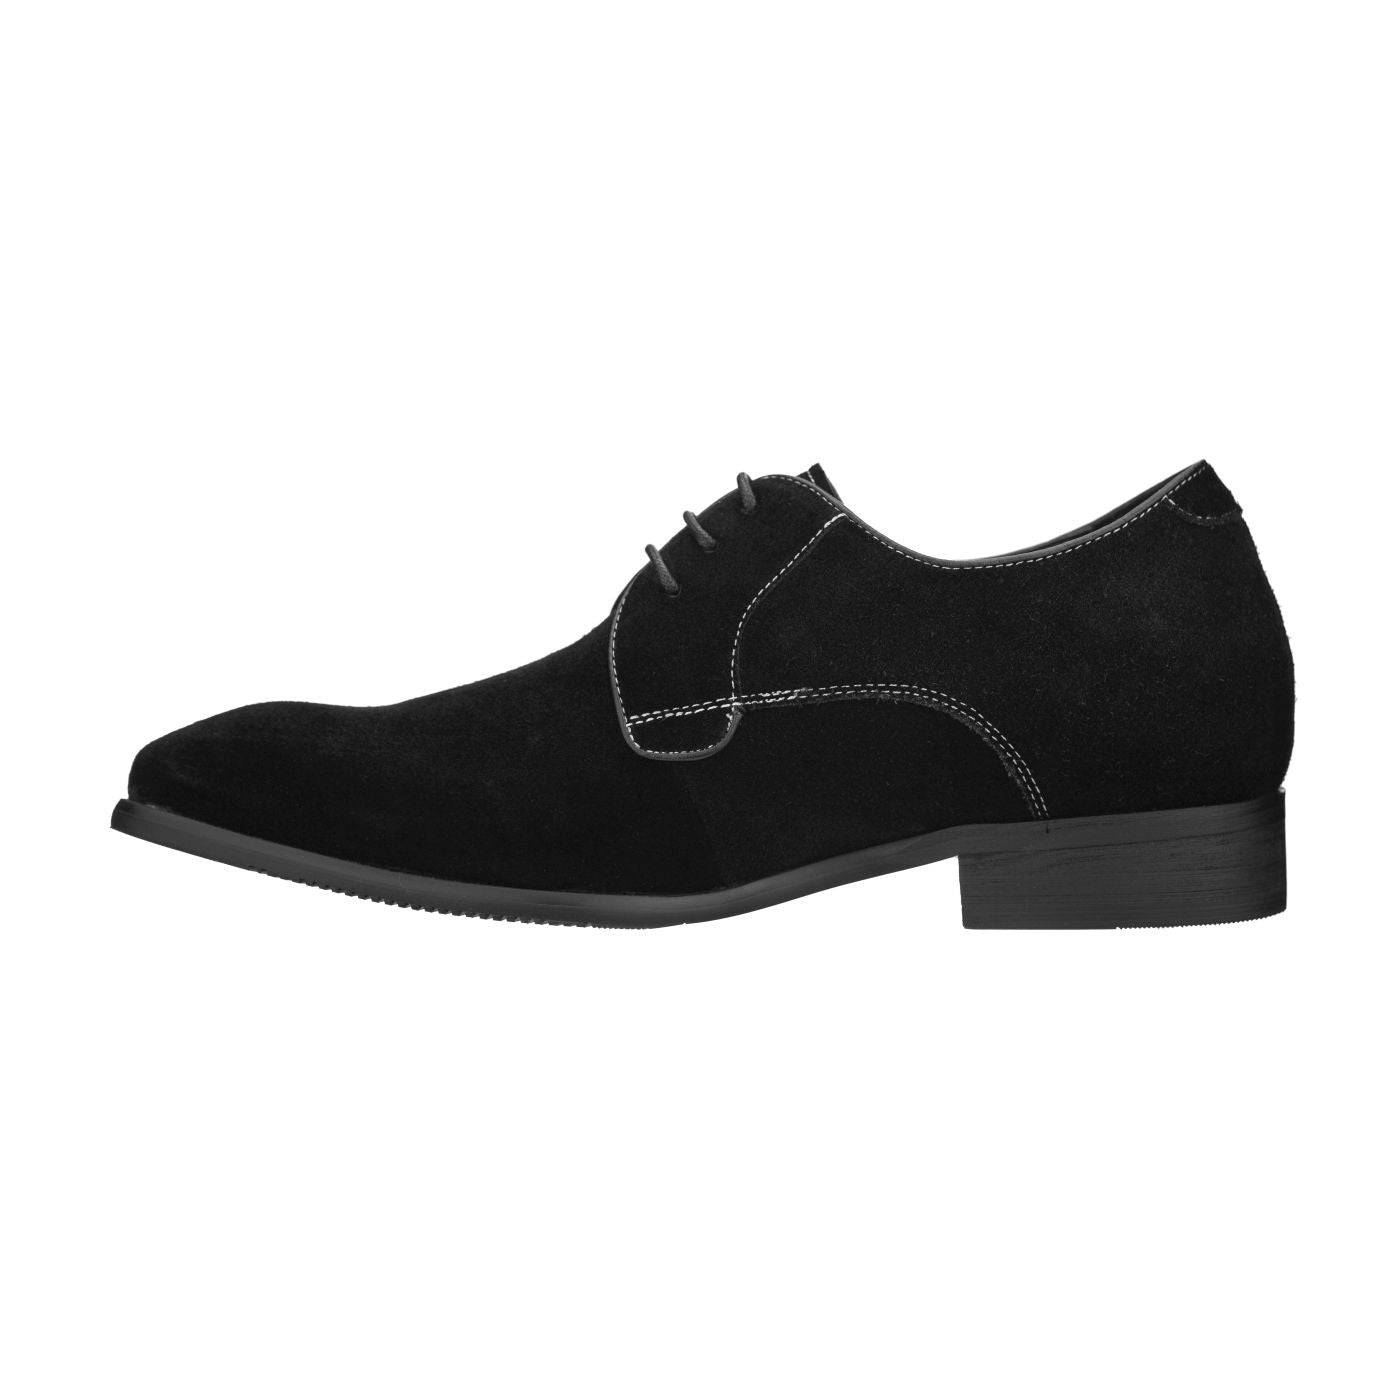 Elevator shoes height increase CALTO 2.4-Inch Taller Black Suede Elevator Dress Shoes Y6001